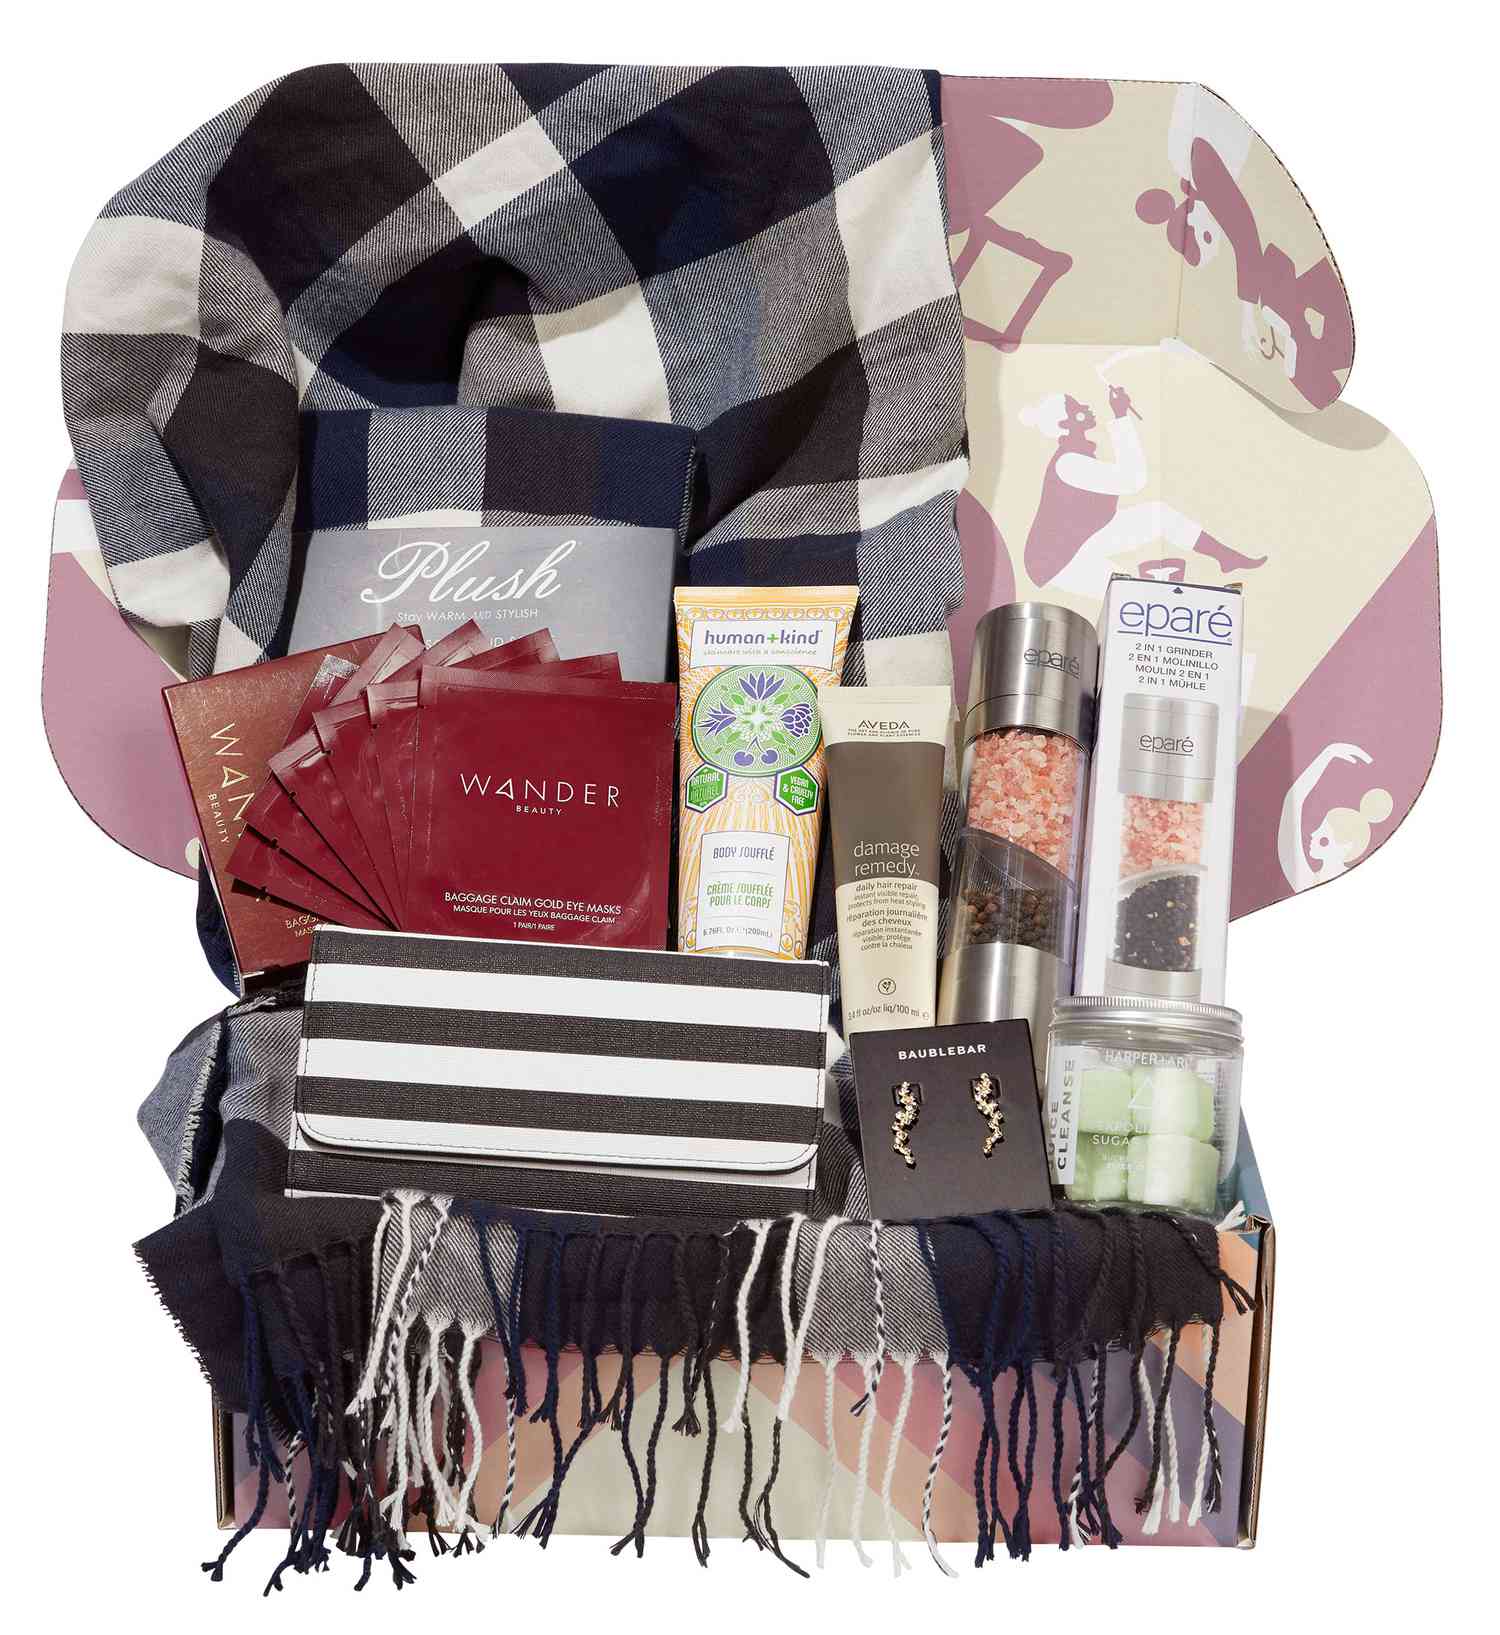 FabFitFun subscription box featuring beauty products and a plaid scarf